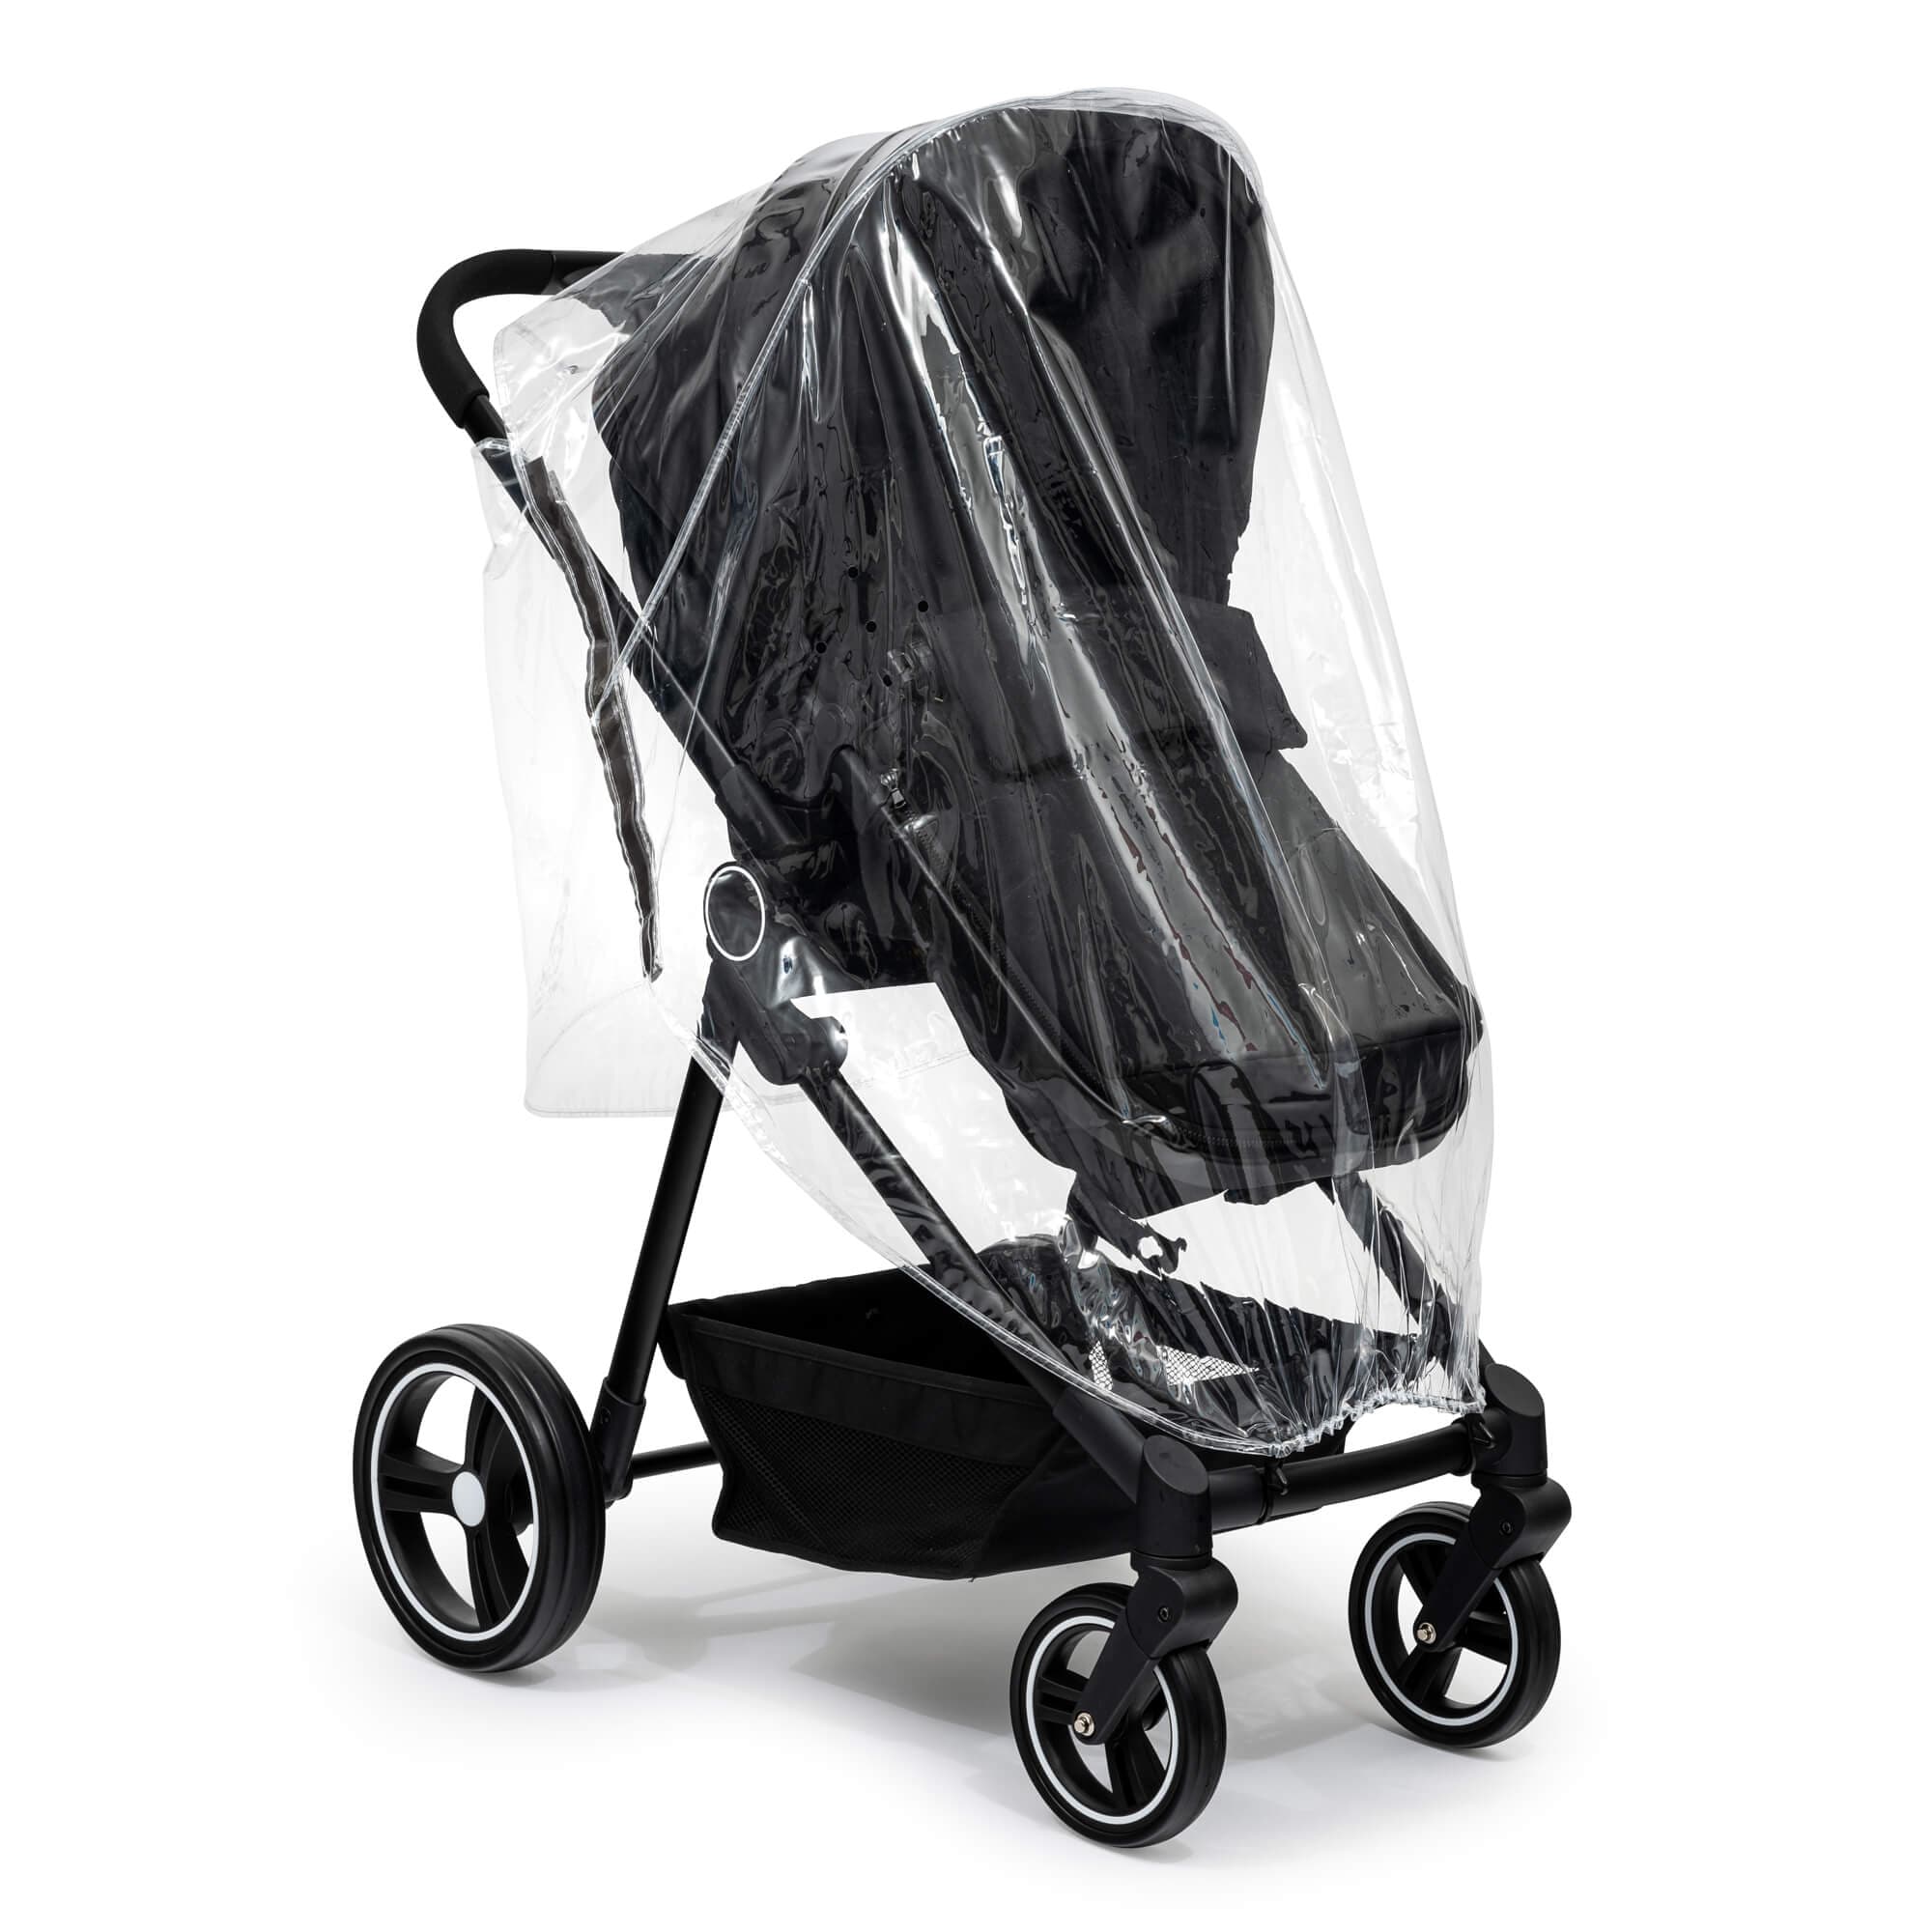 Universal Rain Cover For Pushchairs Strollers Buggys Prams - For Your Little One